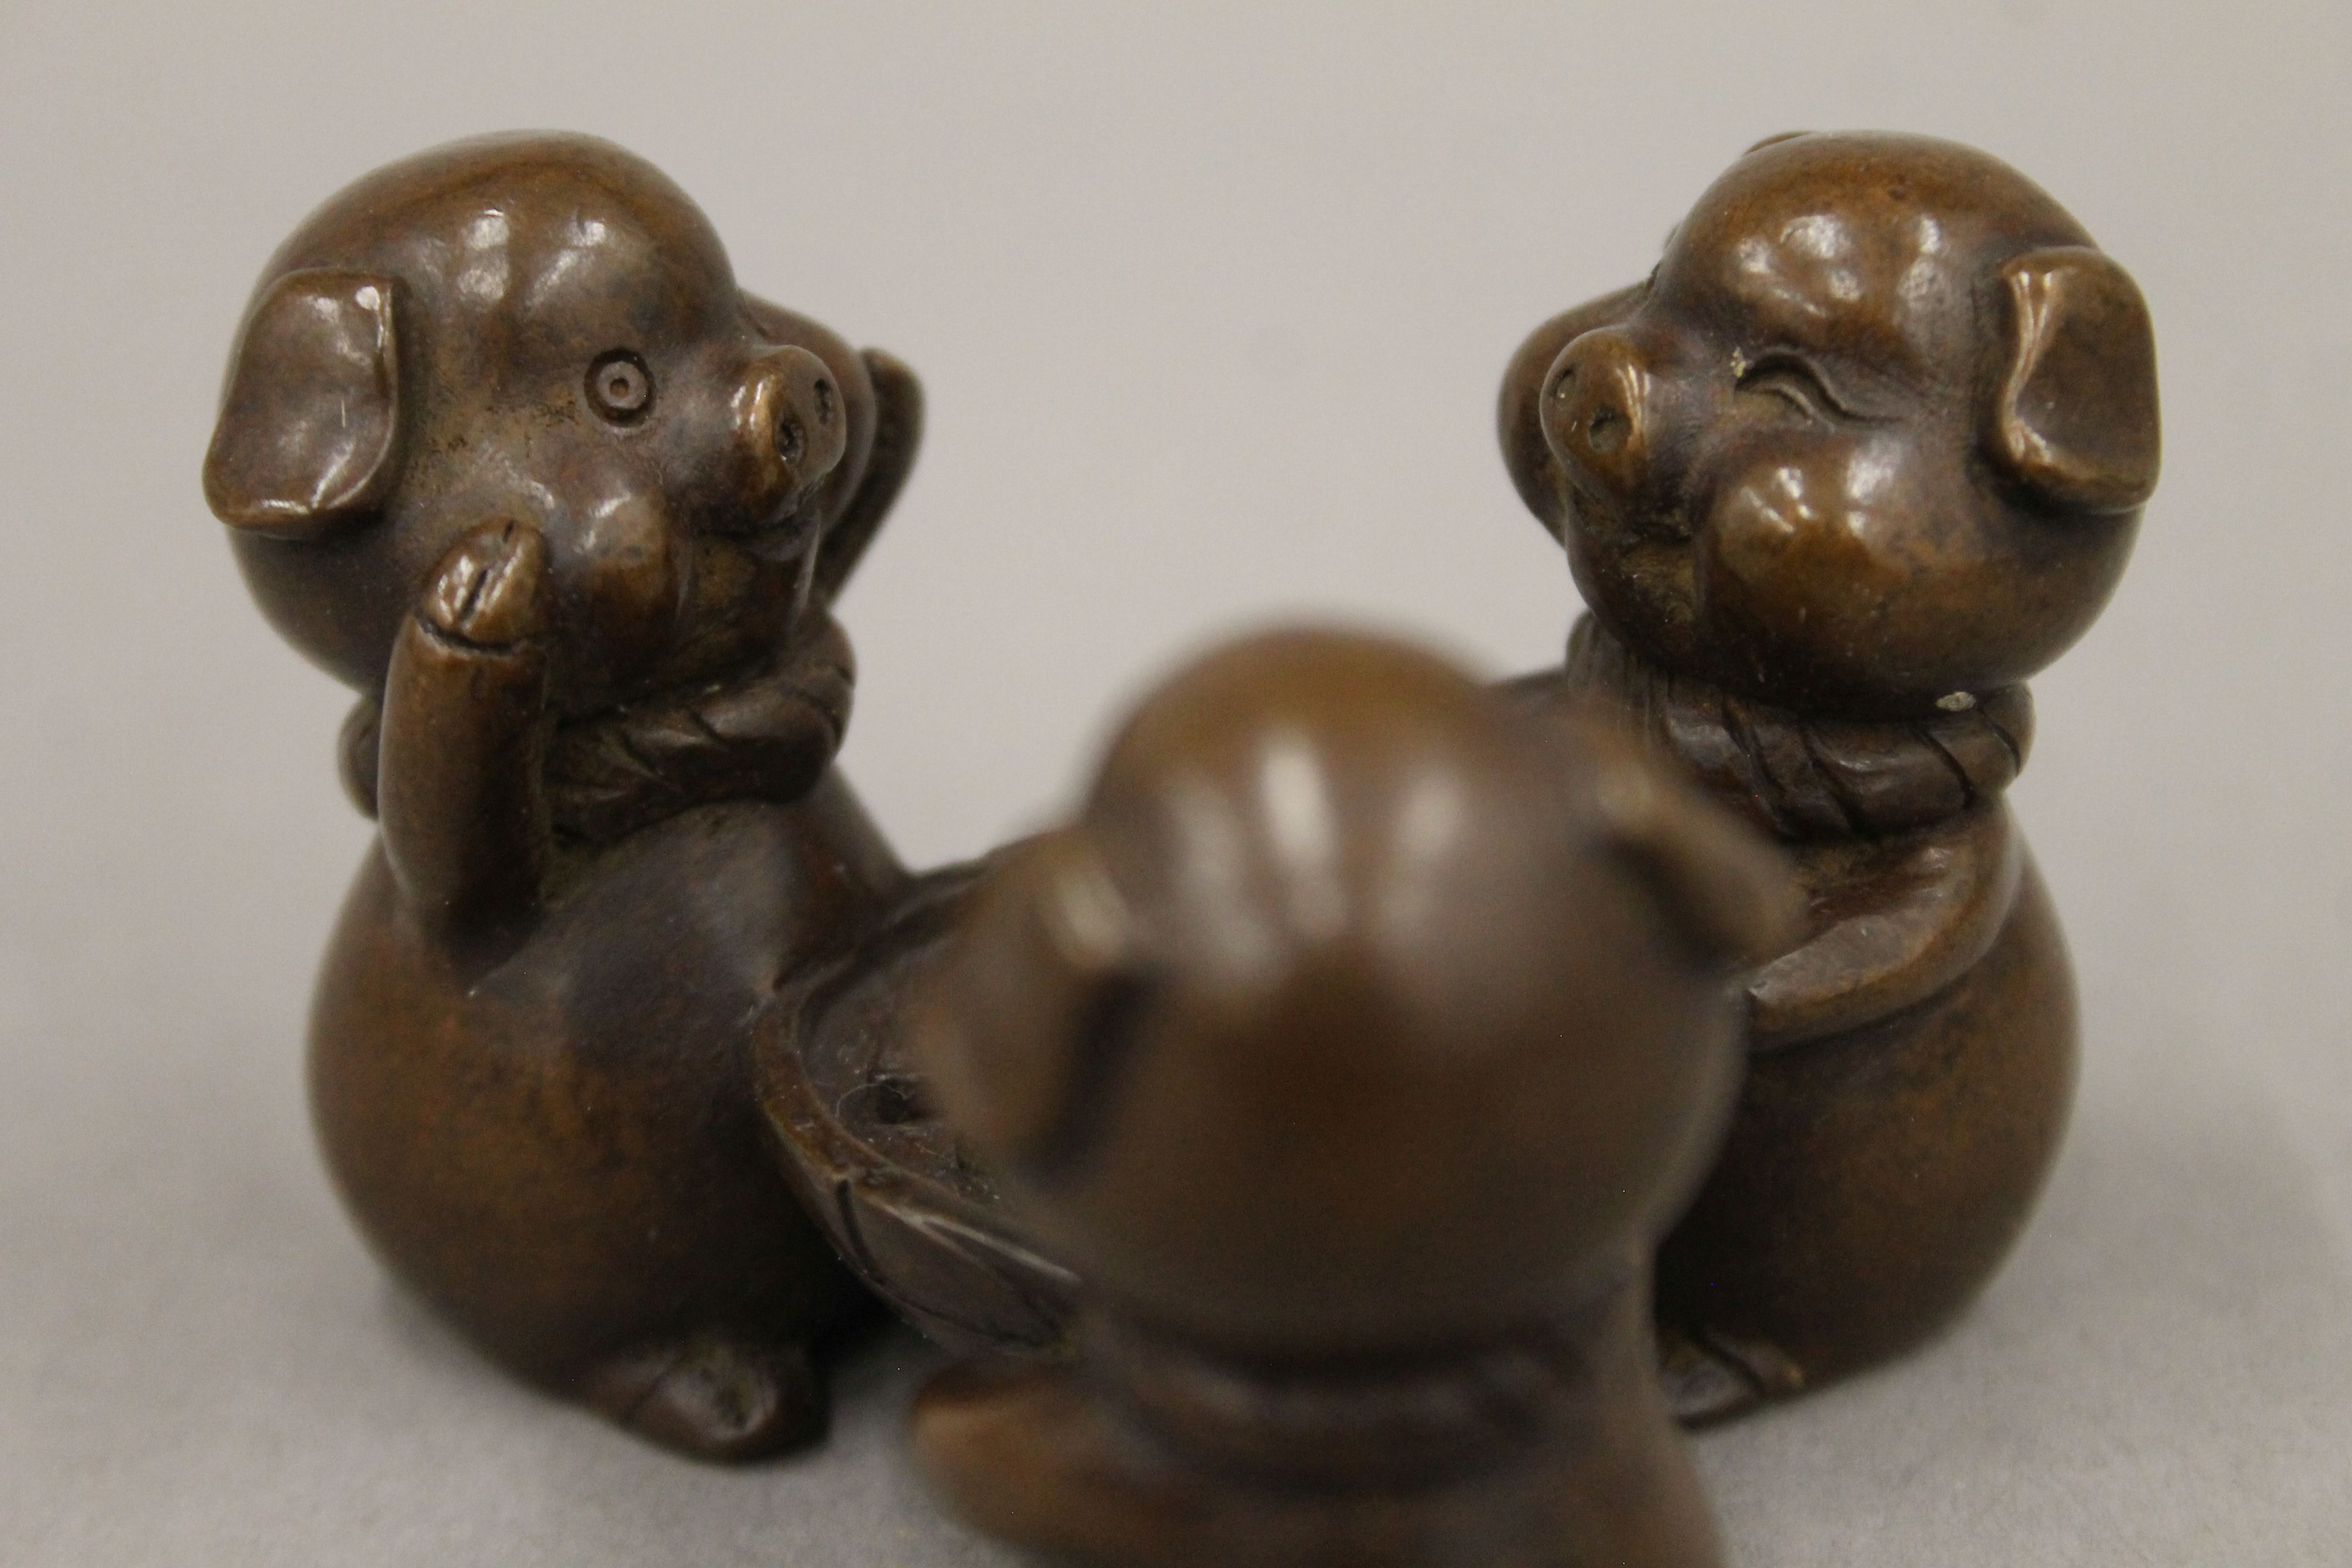 A bronze model of three pigs playing a game. 4.5 cm high. - Image 4 of 6